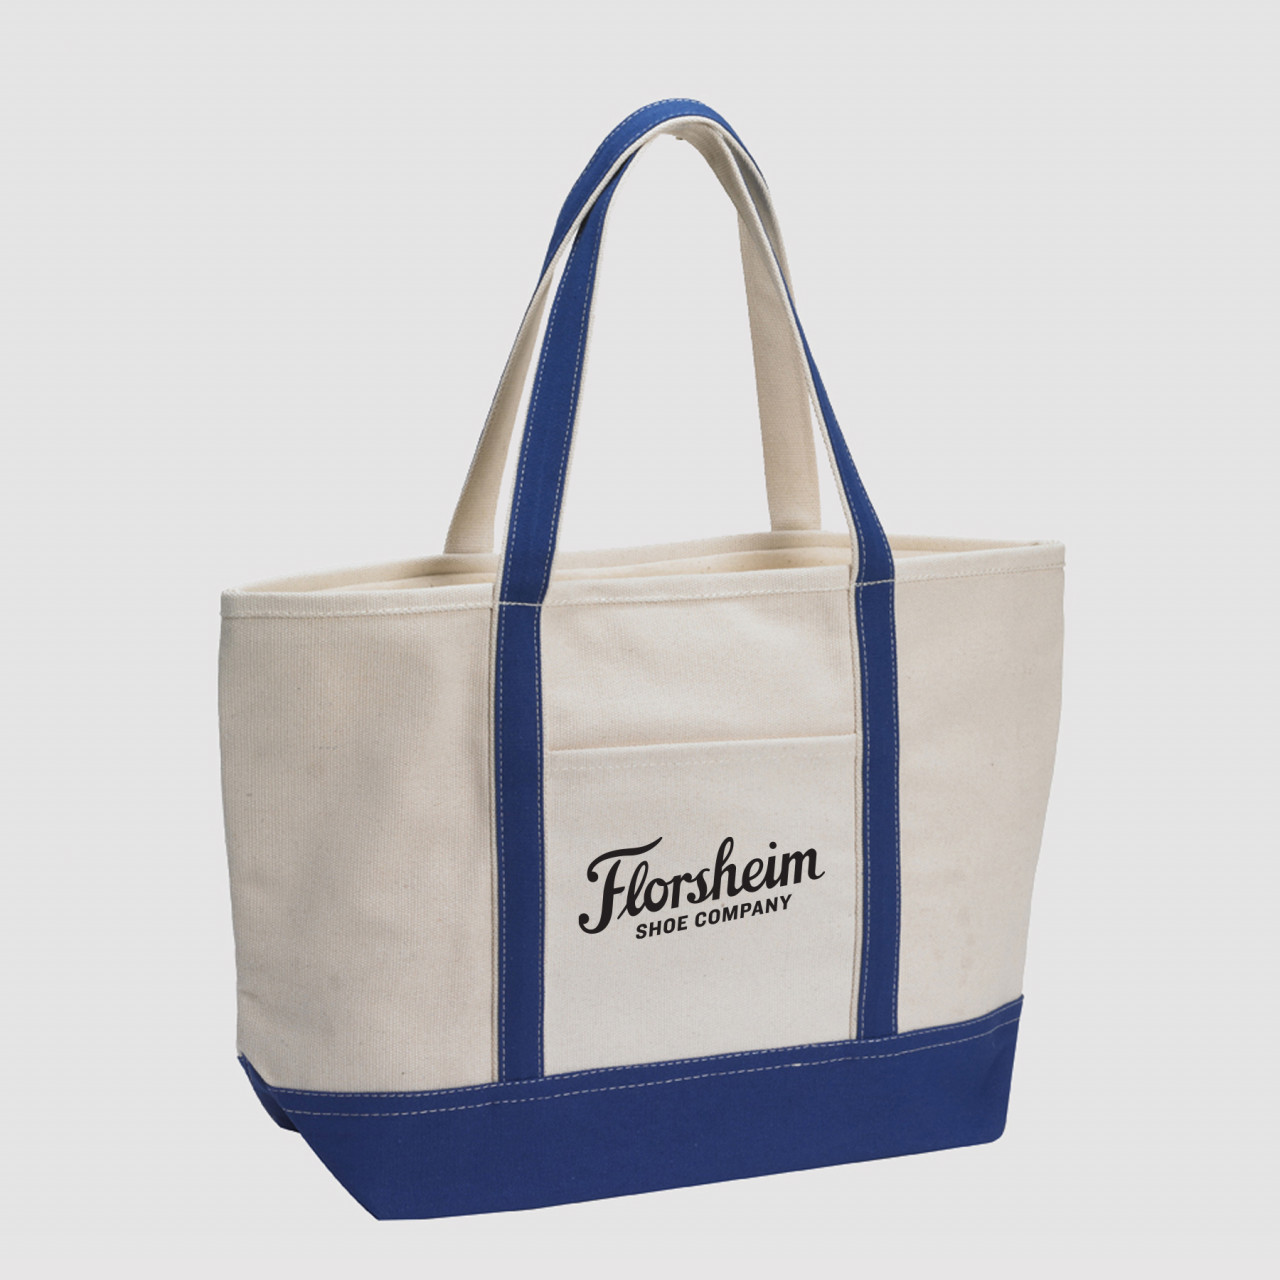 Promotional Small Cotton Canvas Yacht Tote Bags